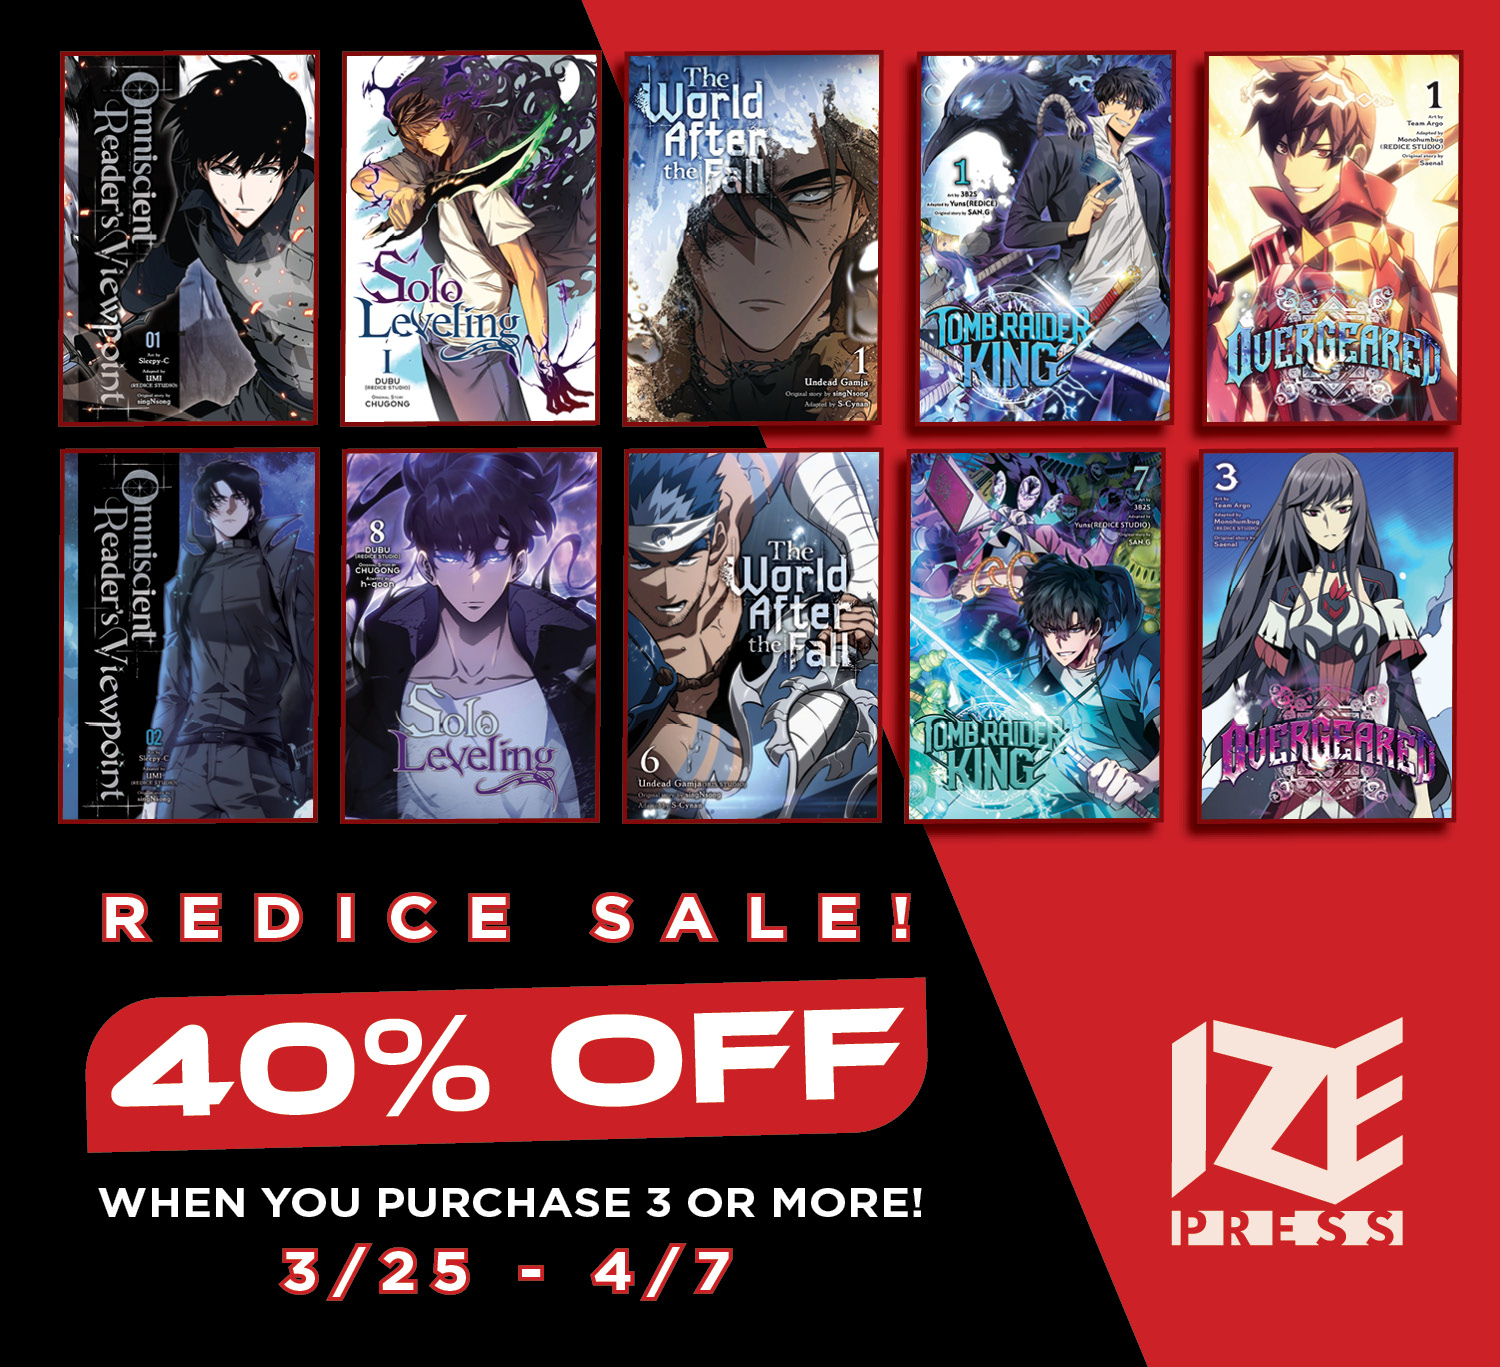 Get In On the Action with Our REDICE Sale!